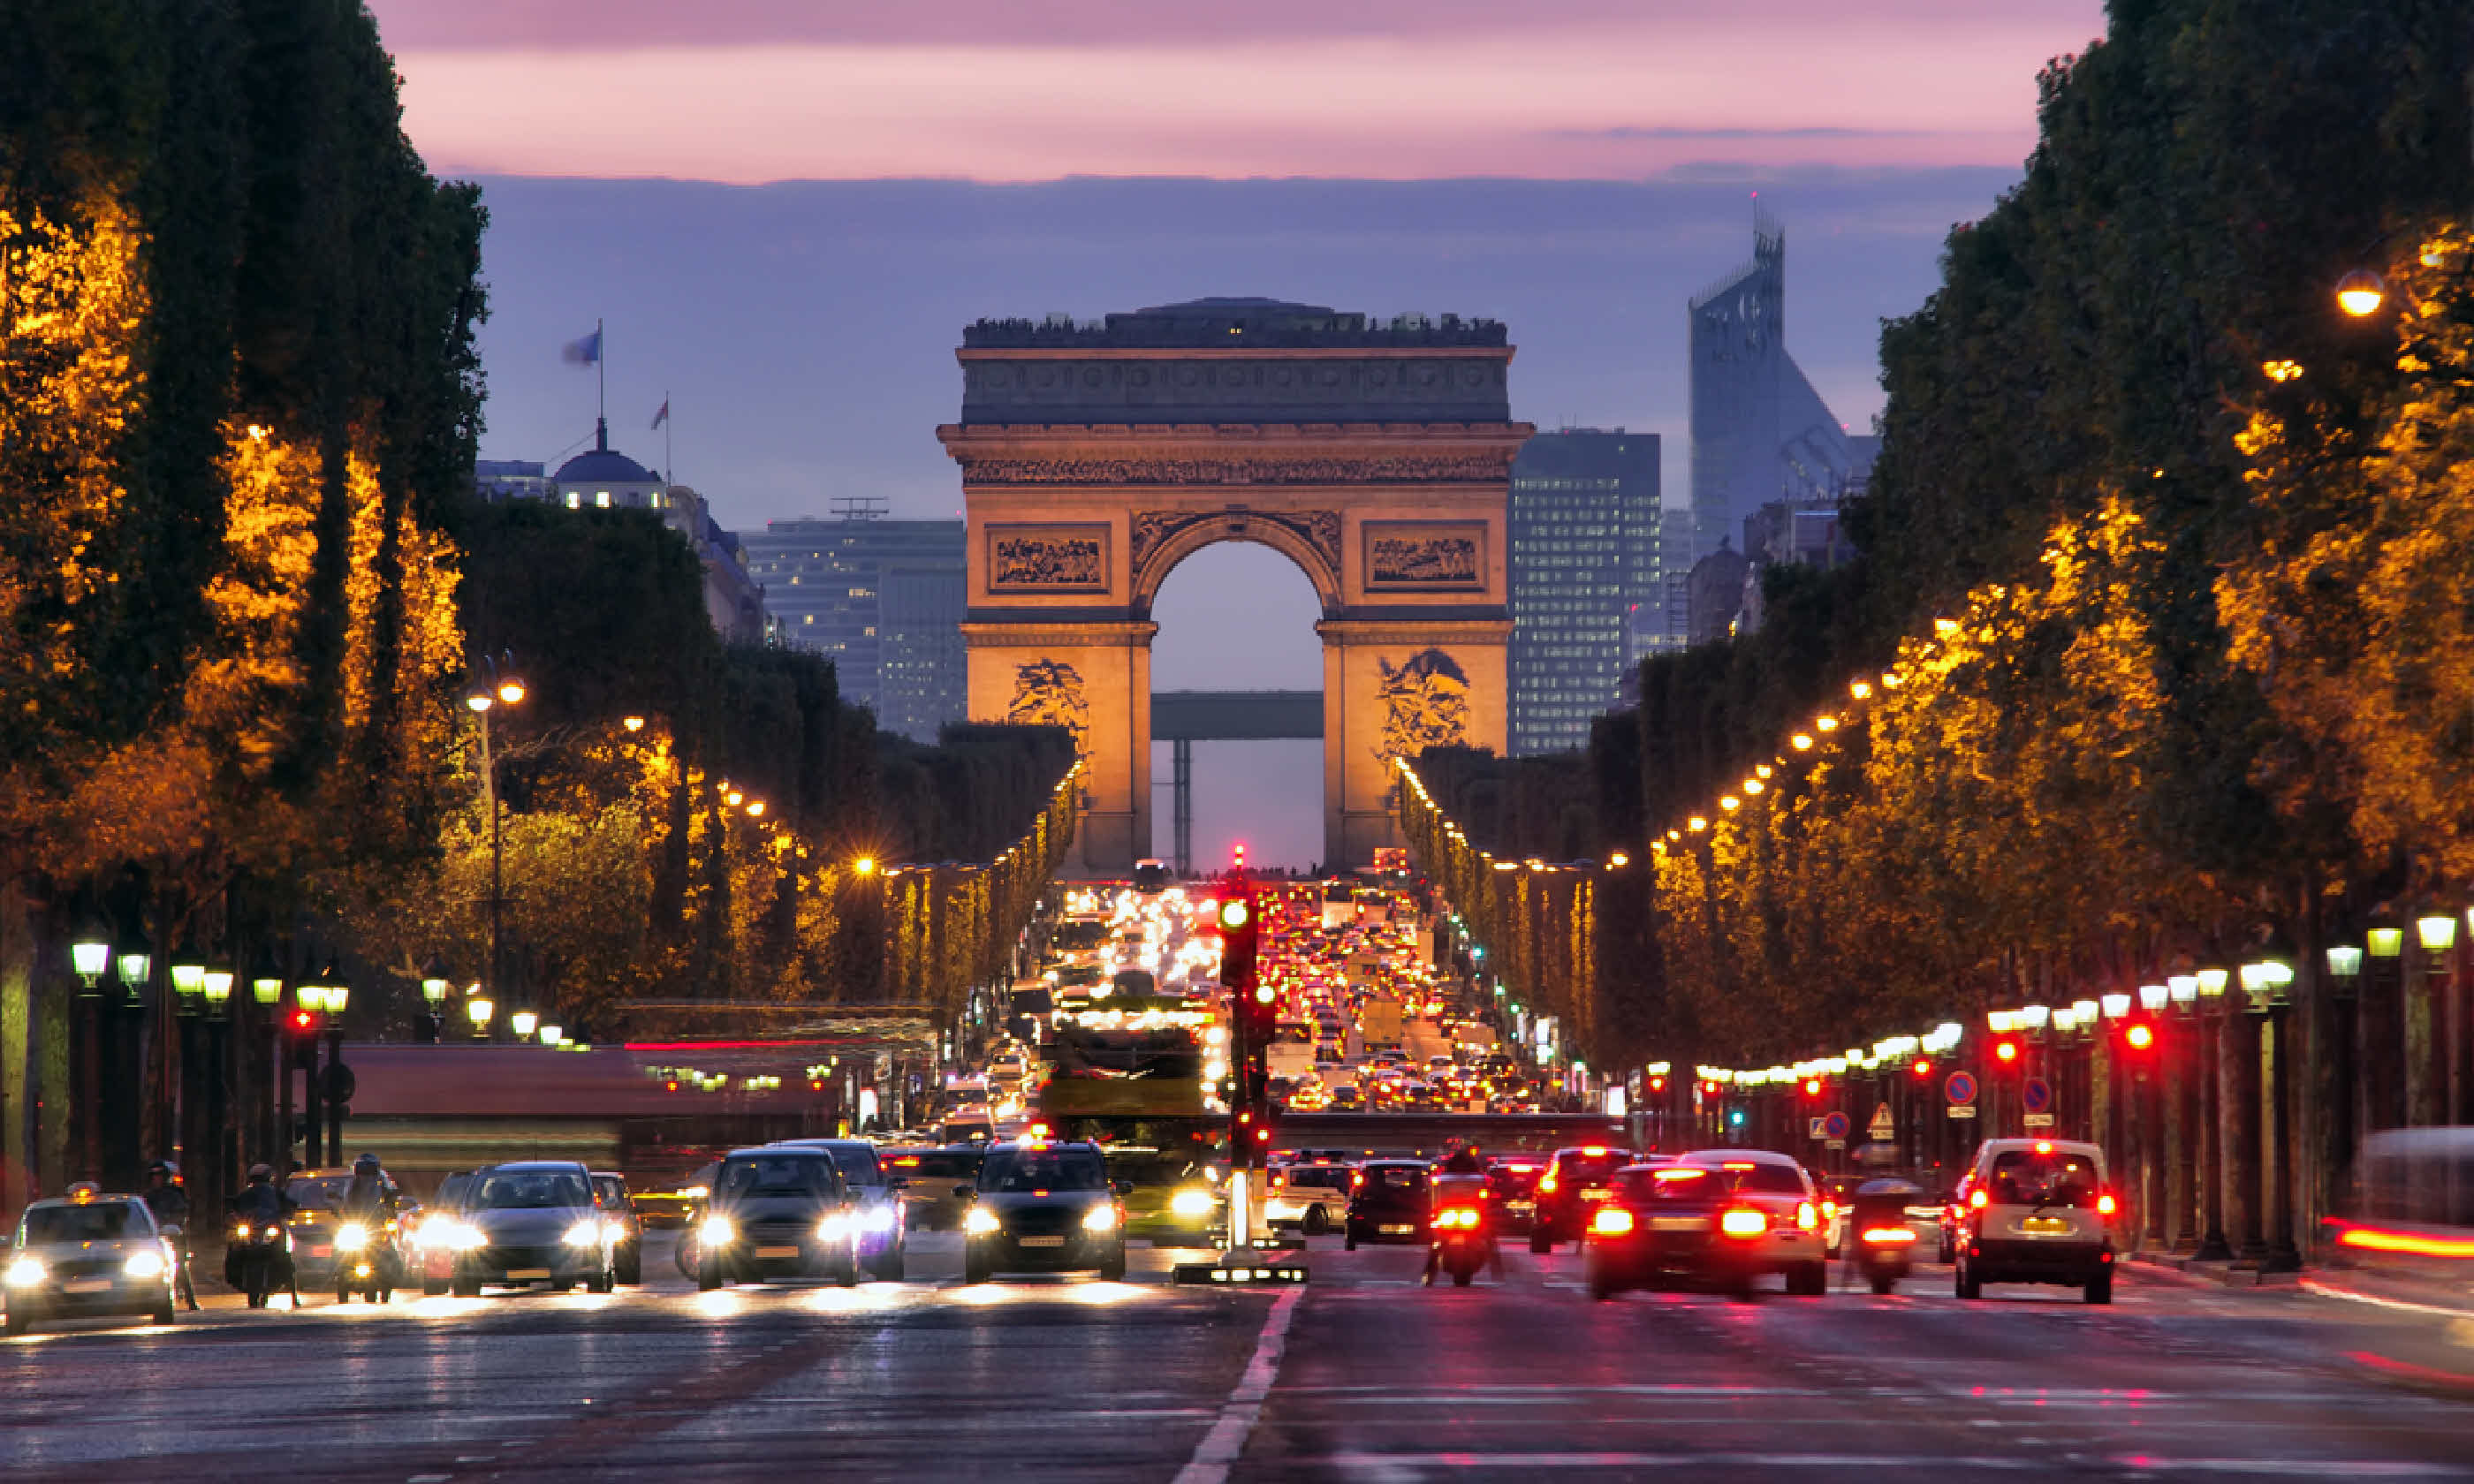 Champs-Elysees at night (Shutterstock)